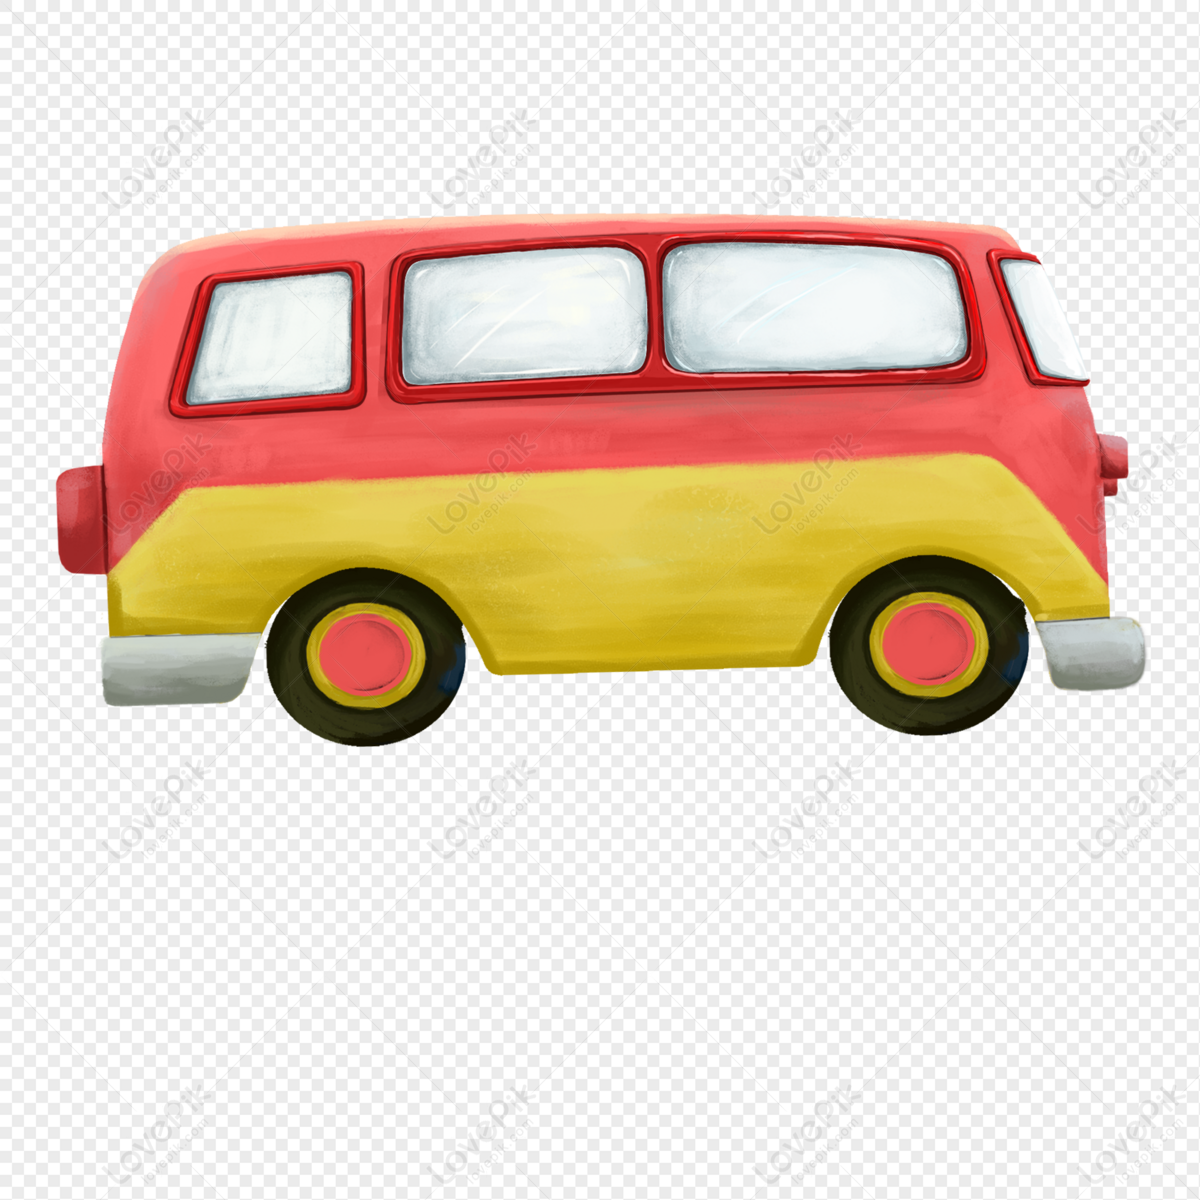 Cartoon Bus PNG Hd Transparent Image And Clipart Image For Free Download -  Lovepik | 401420714